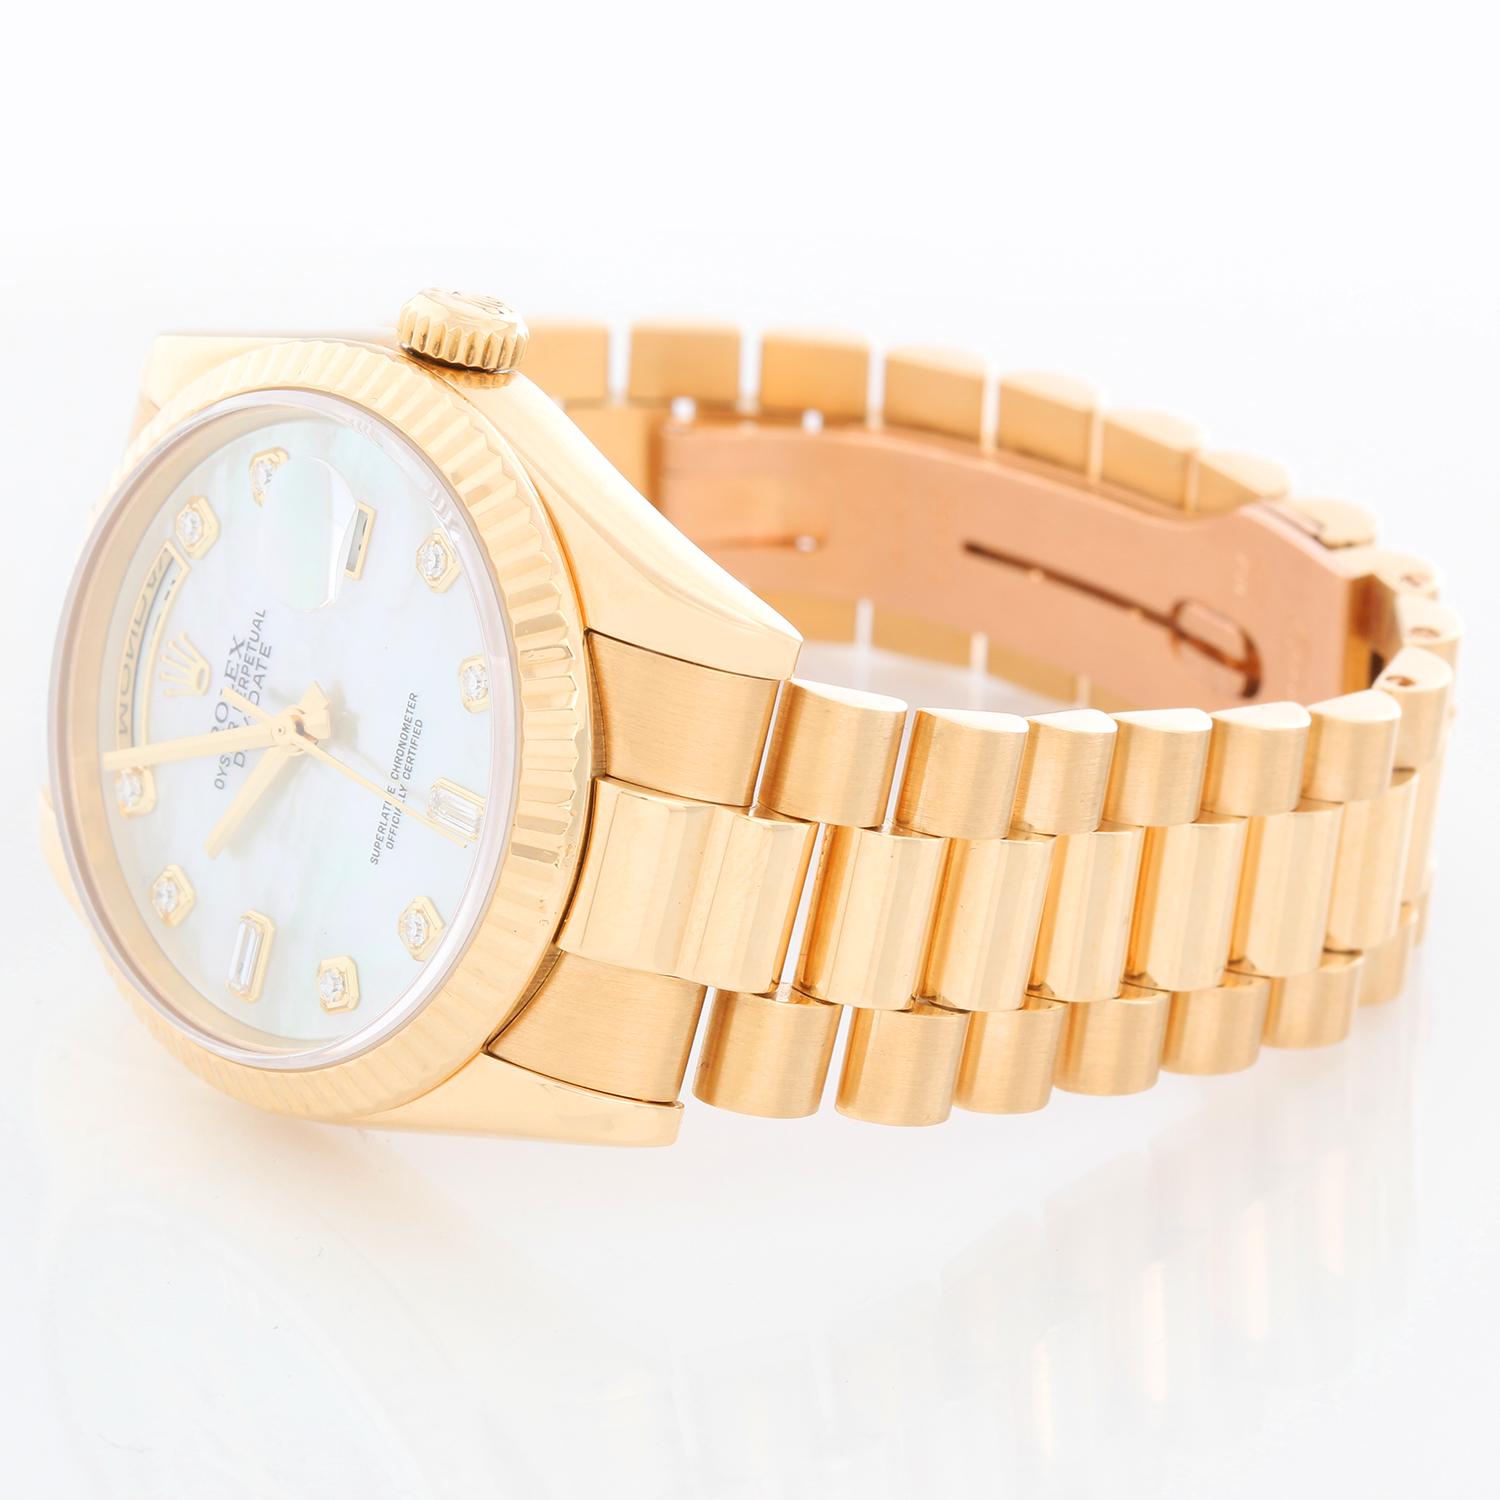 Rolex President Day-Date Men's Mother of Pearl Watch 118238 - Automatic winding, 31 jewels, Quickset, sapphire crystal. 18k yellow gold case with fluted bezel . Factory Mother of Pearl diamond dial. 18k yellow gold hidden-clasp President bracelet.